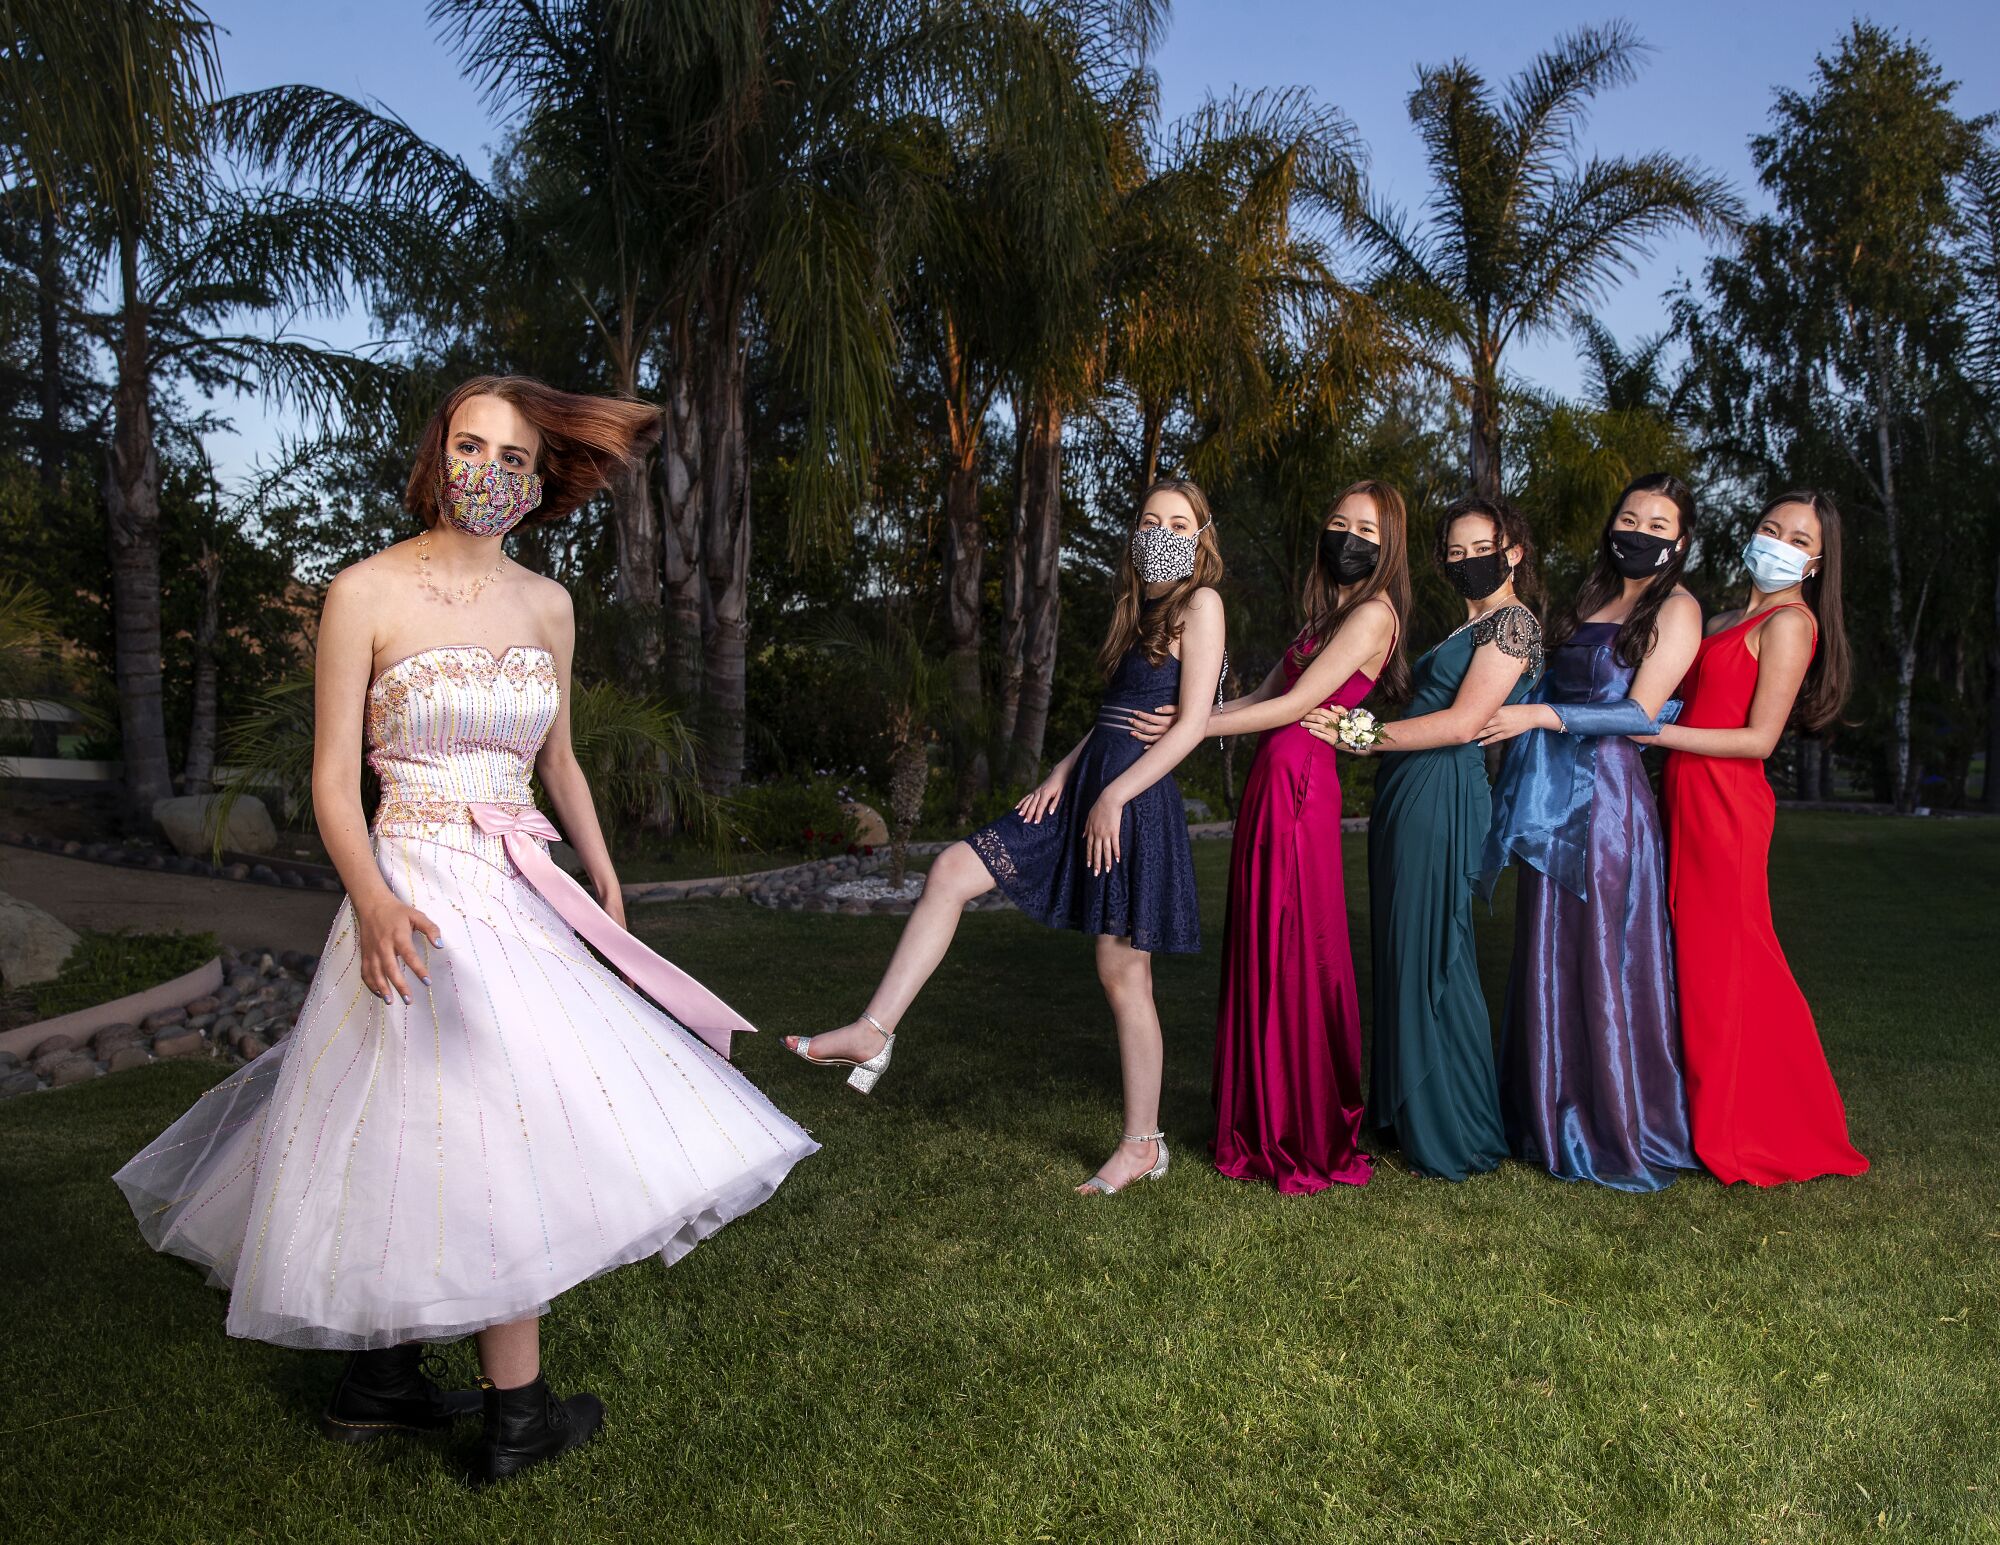 Students line up in masks and formal gowns.